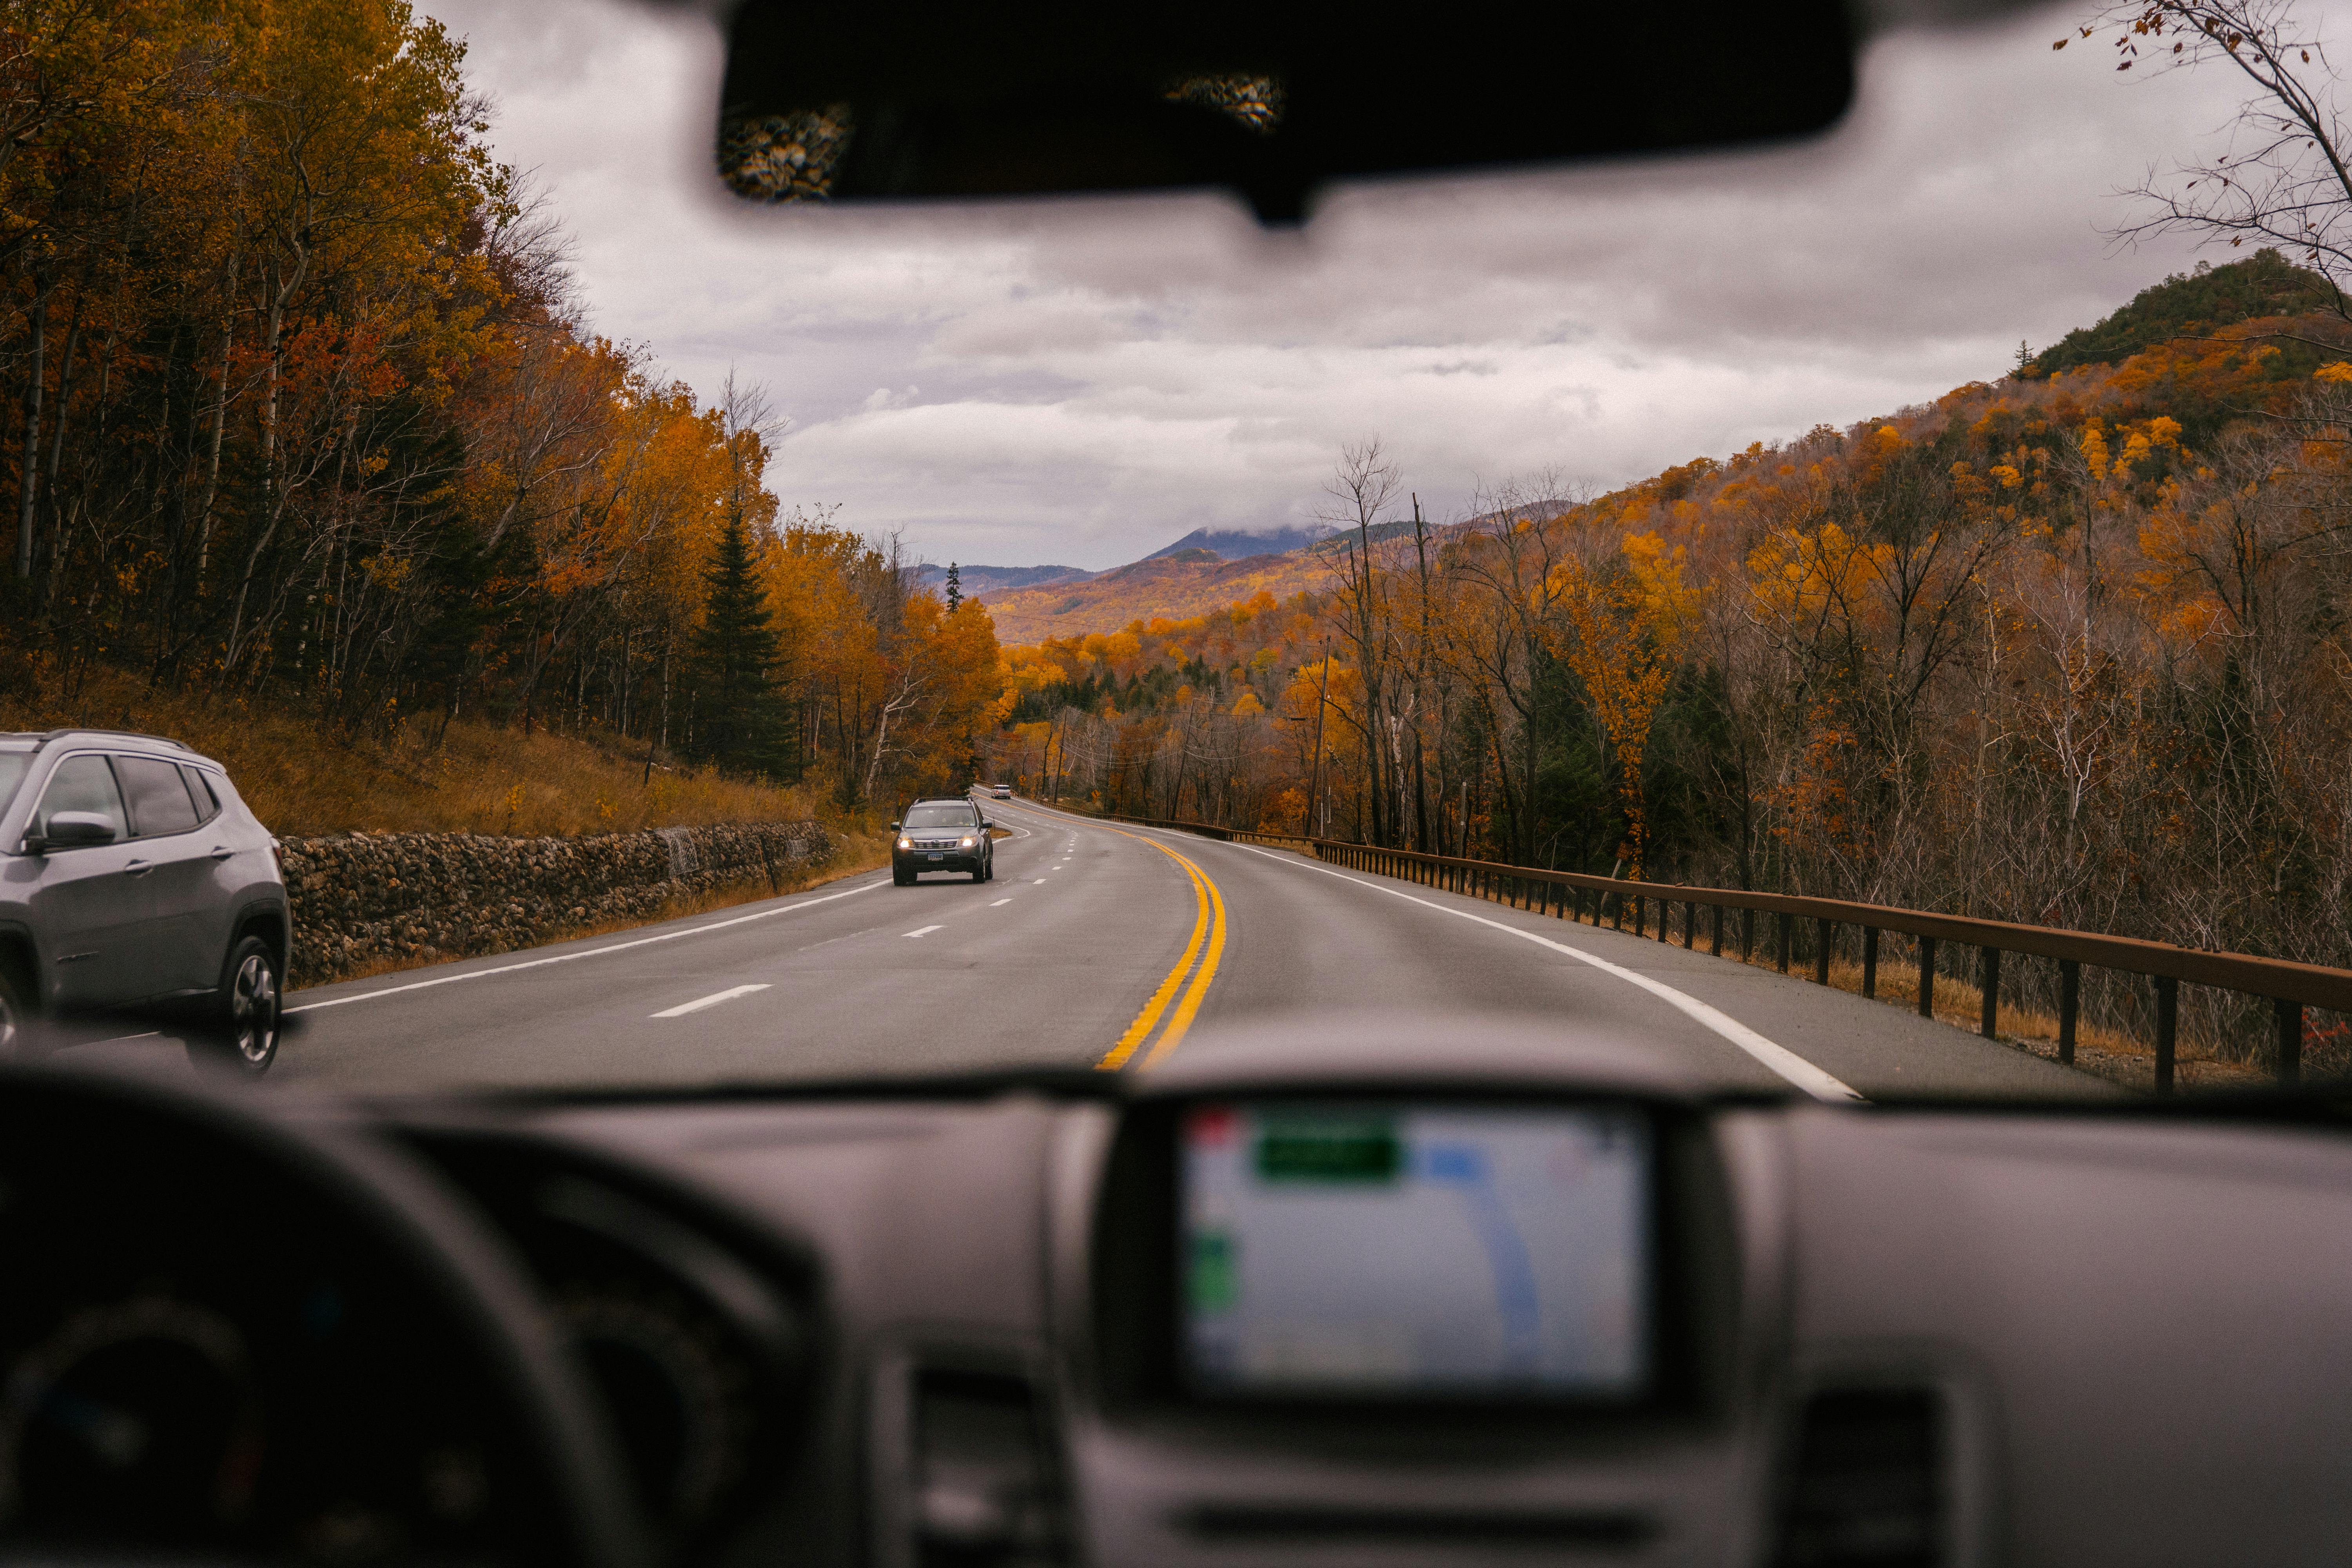 View of the road ahead from a car. For illustration purposes only | Source: Pexels